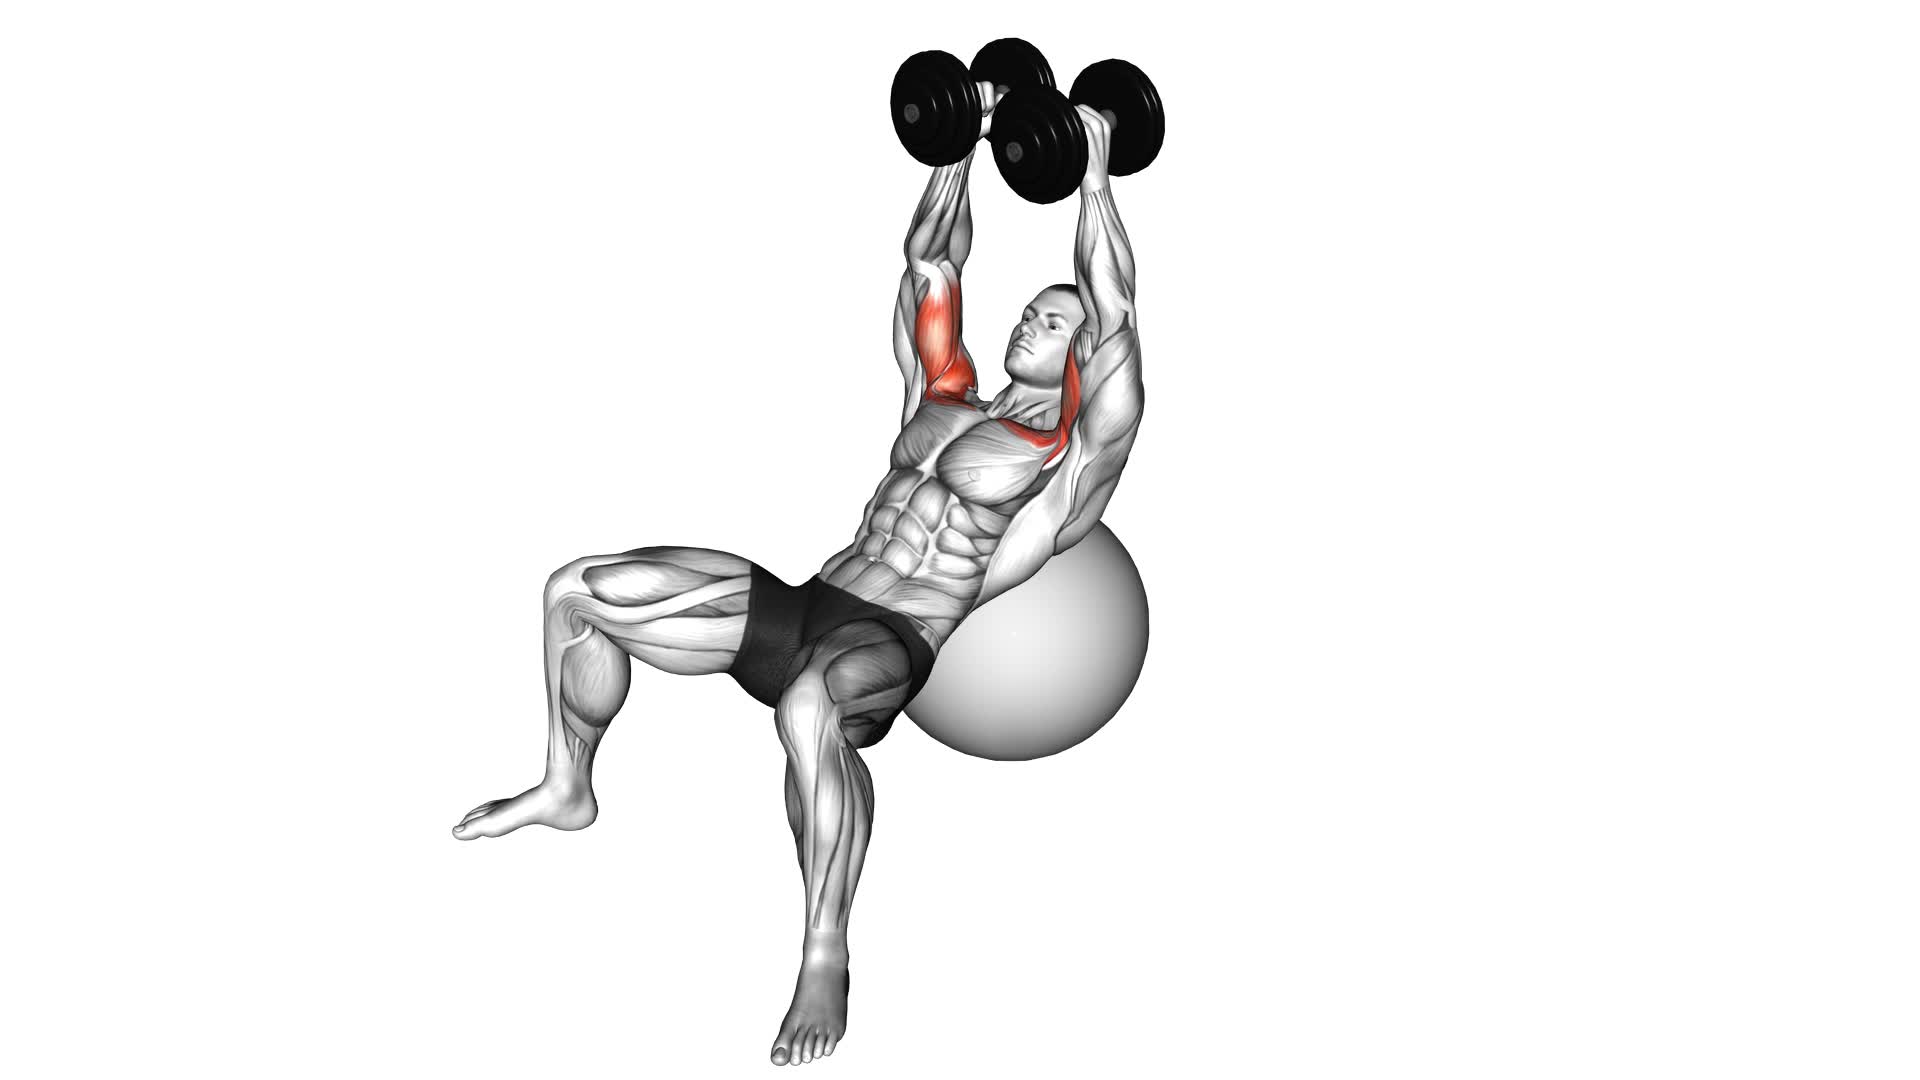 Dumbbell Incline Fly on Exercise Ball - Video Exercise Guide & Tips